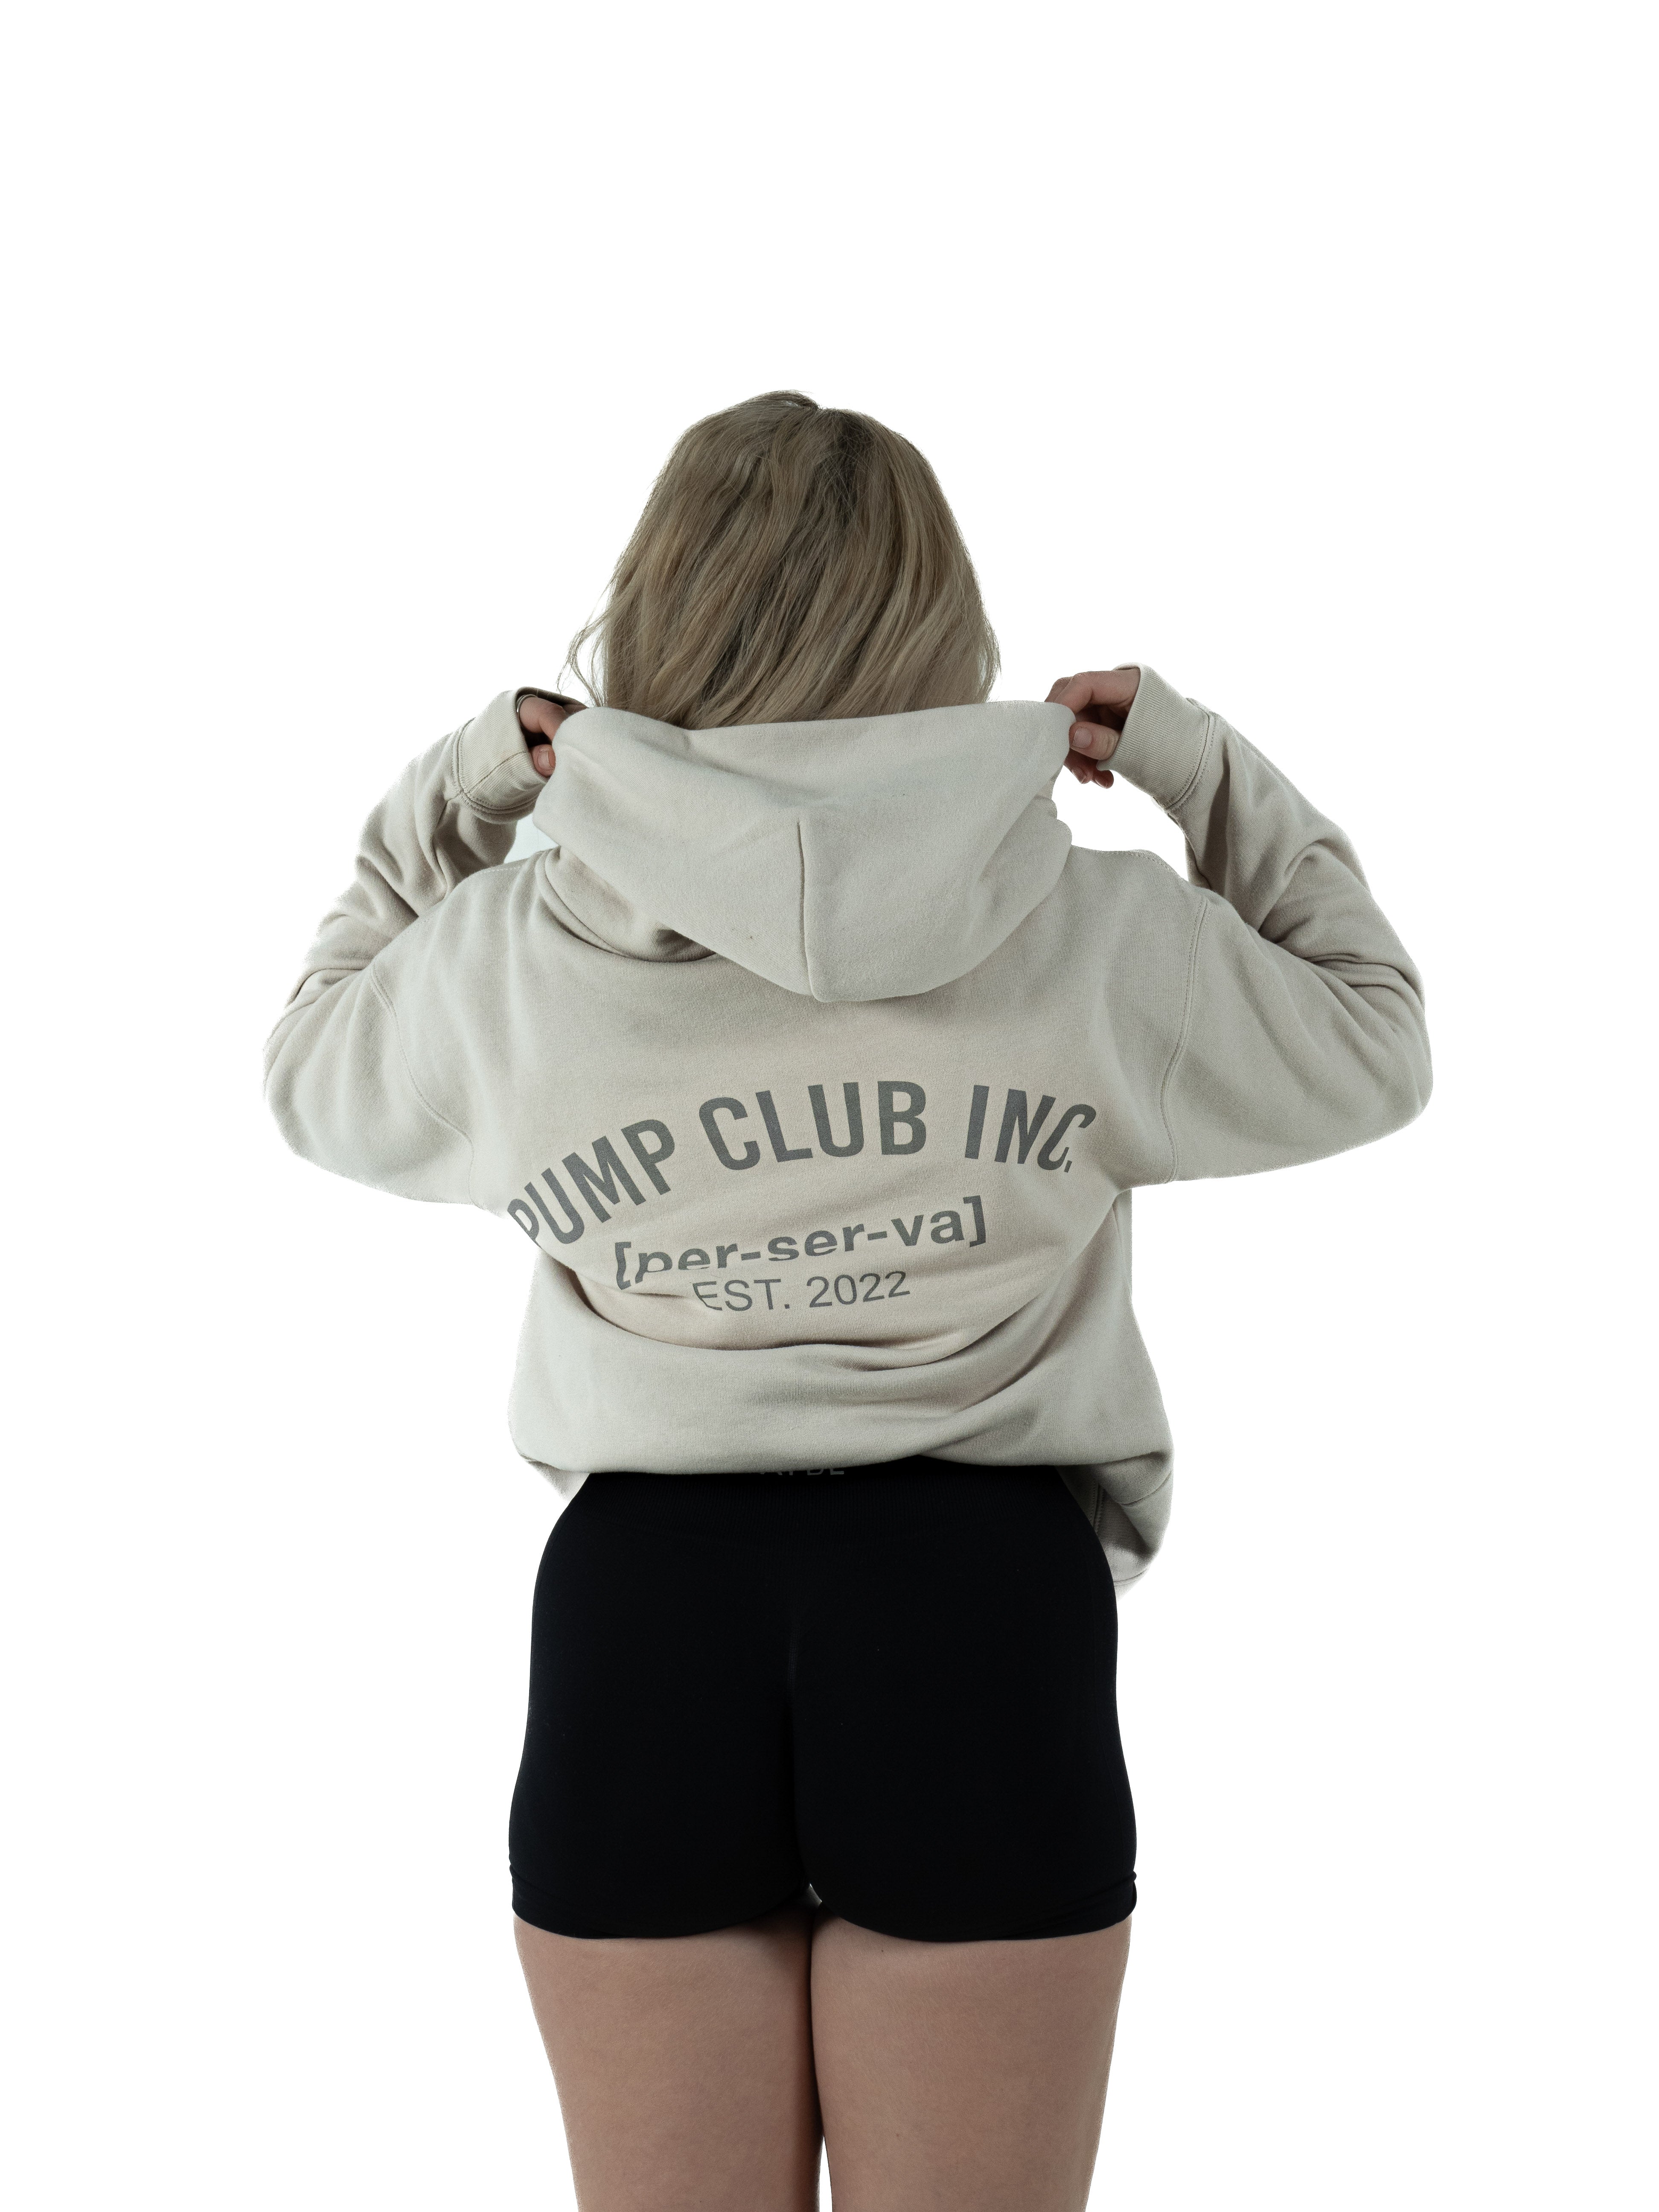 Core Collection Hoodie - Cream